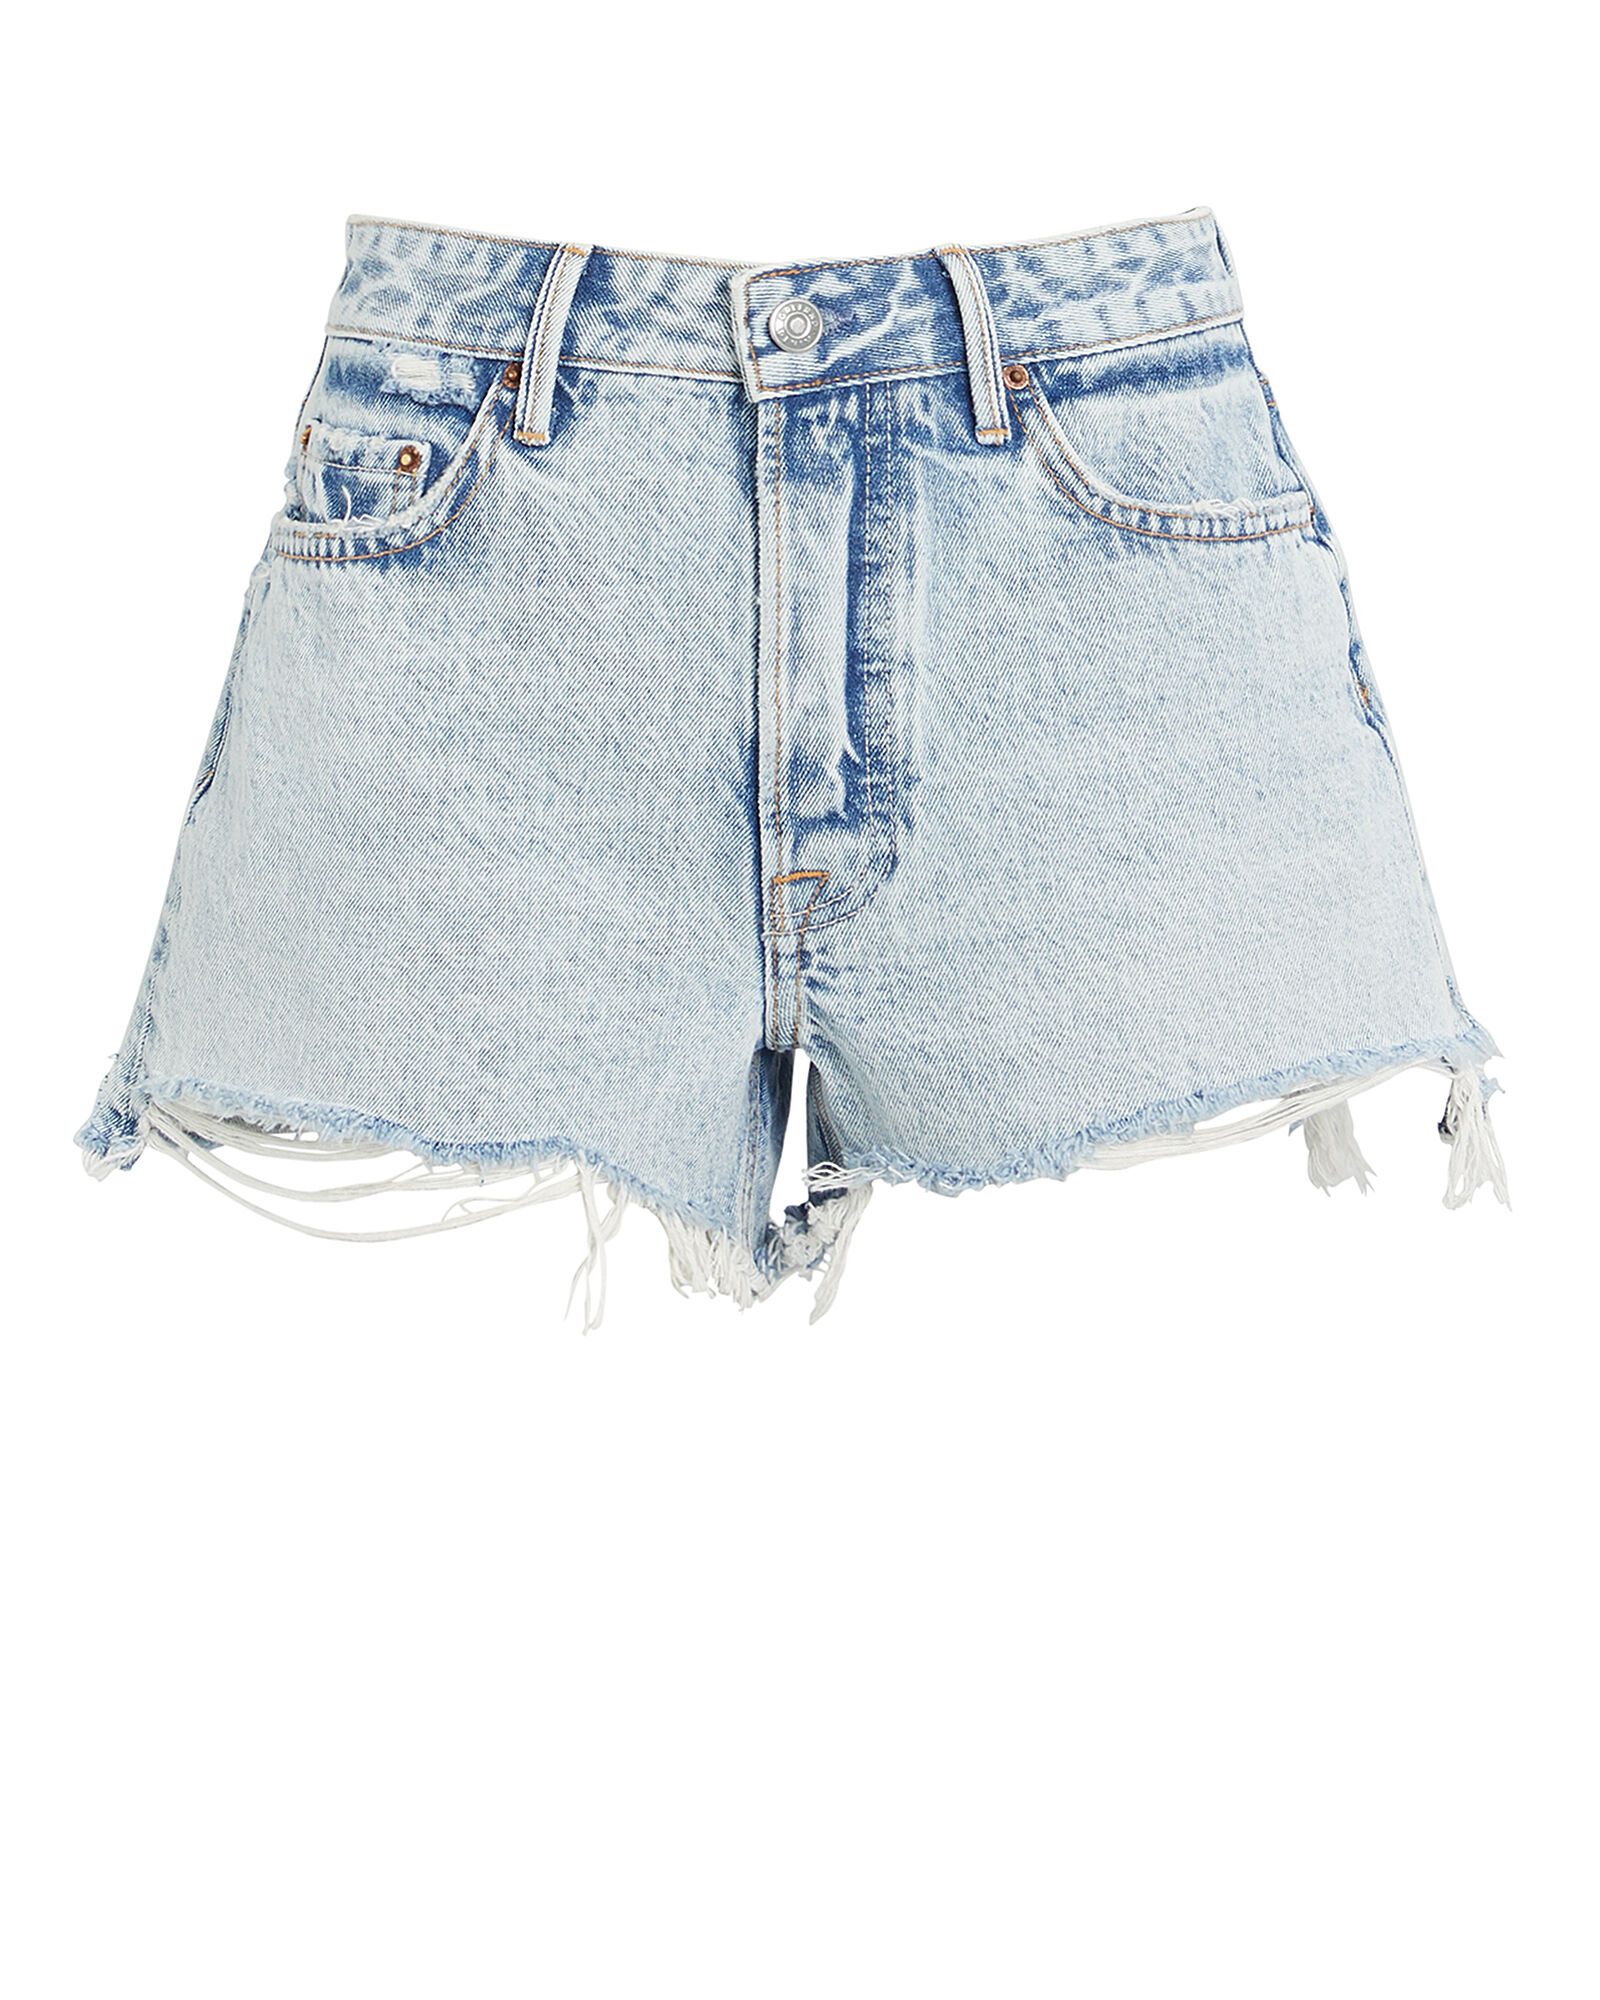 loose fit jean shorts womens